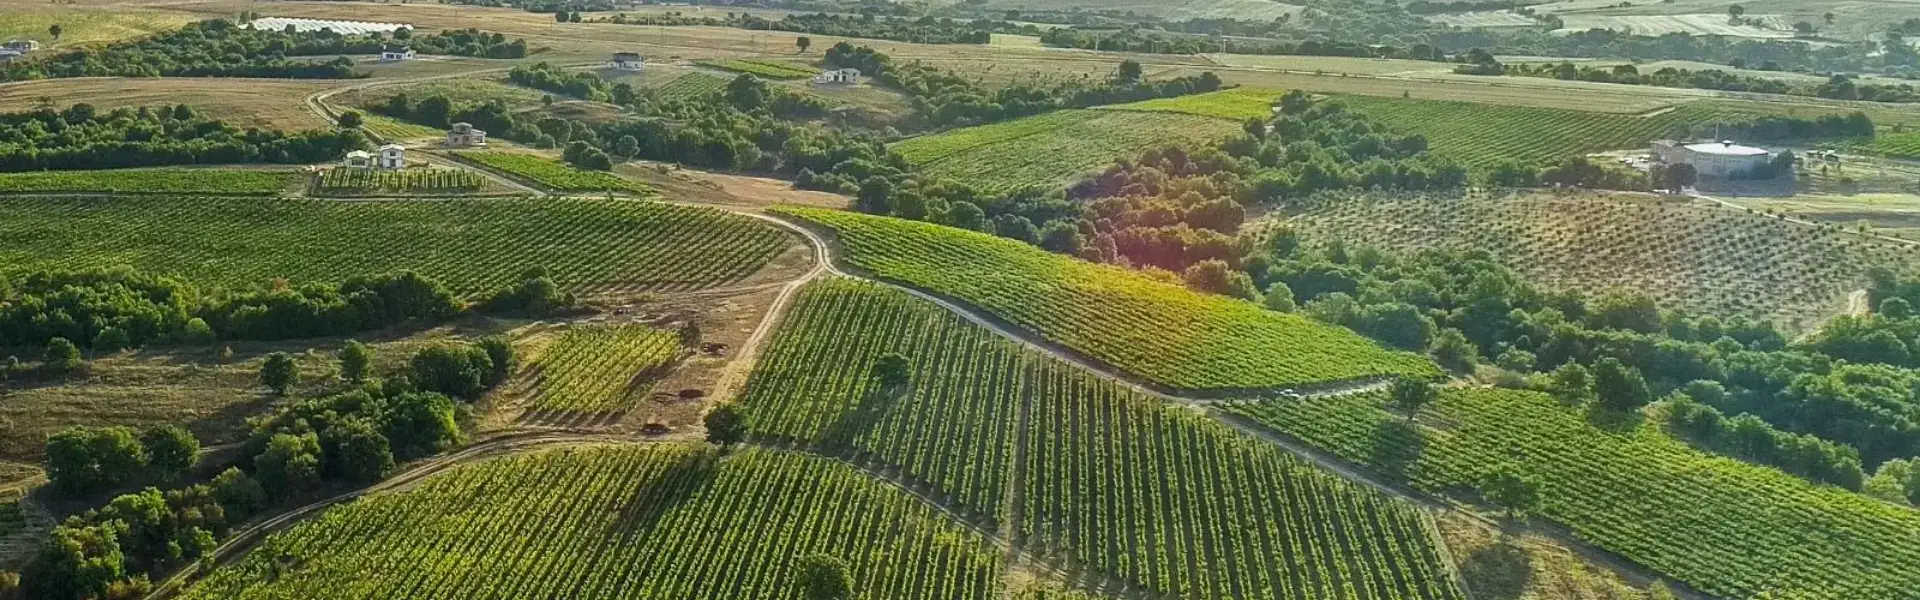 Turkey Vineyard Route: A Unique Experience for Wine and Nature Lovers